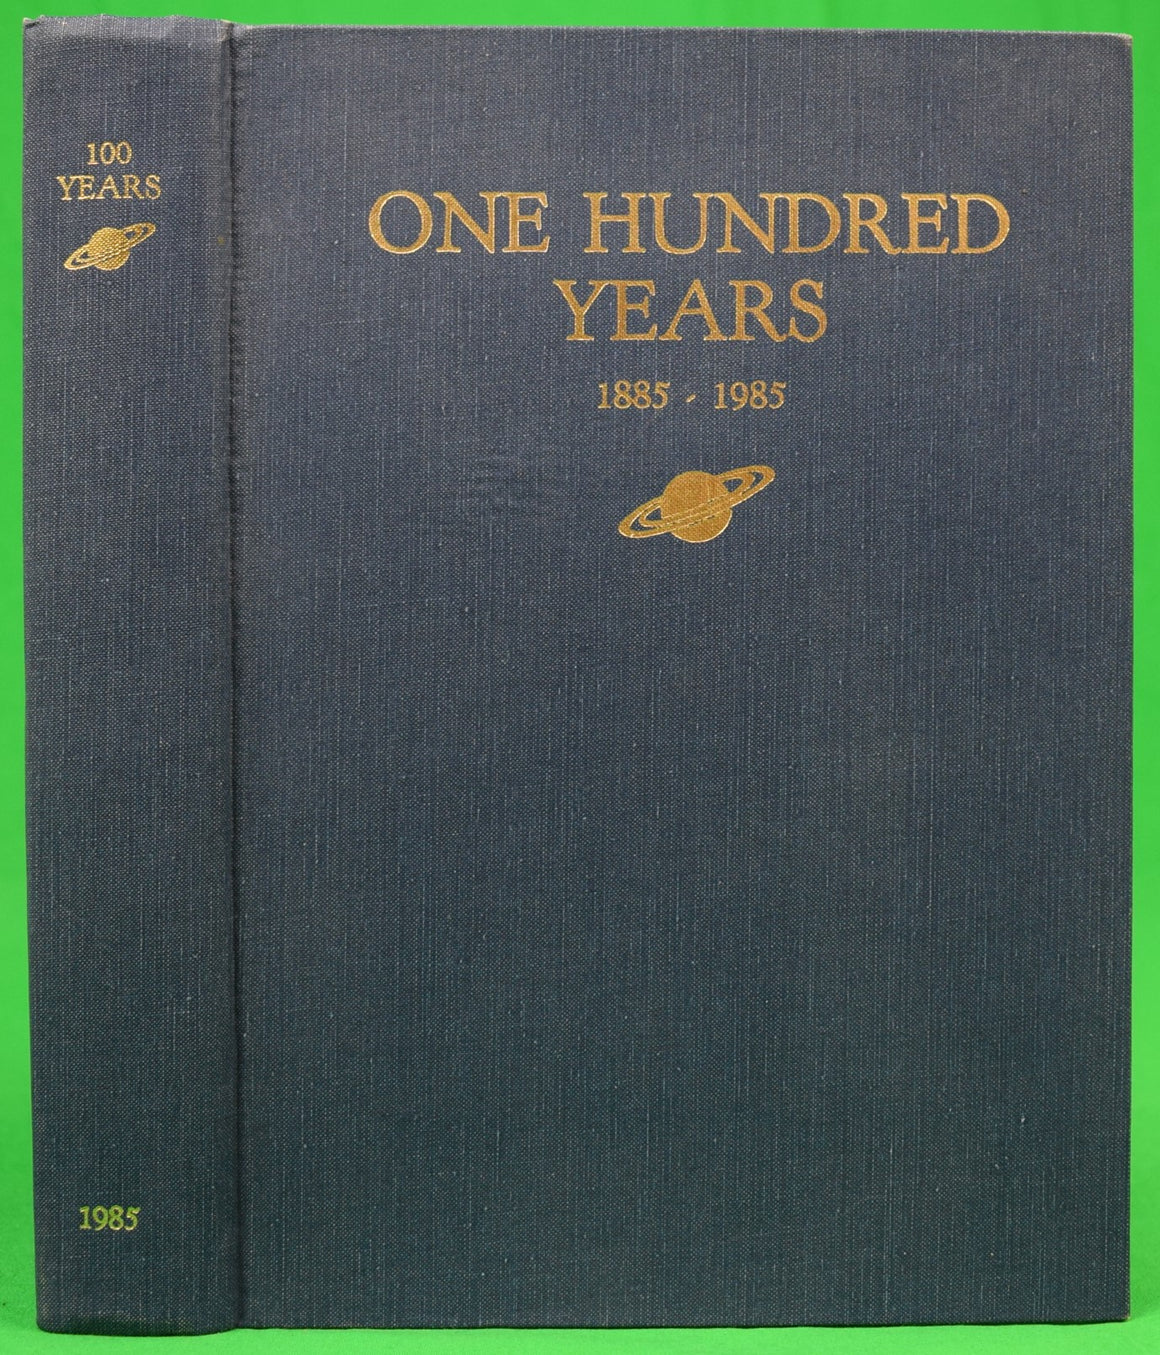 "One Hundred Years 1885-1985"